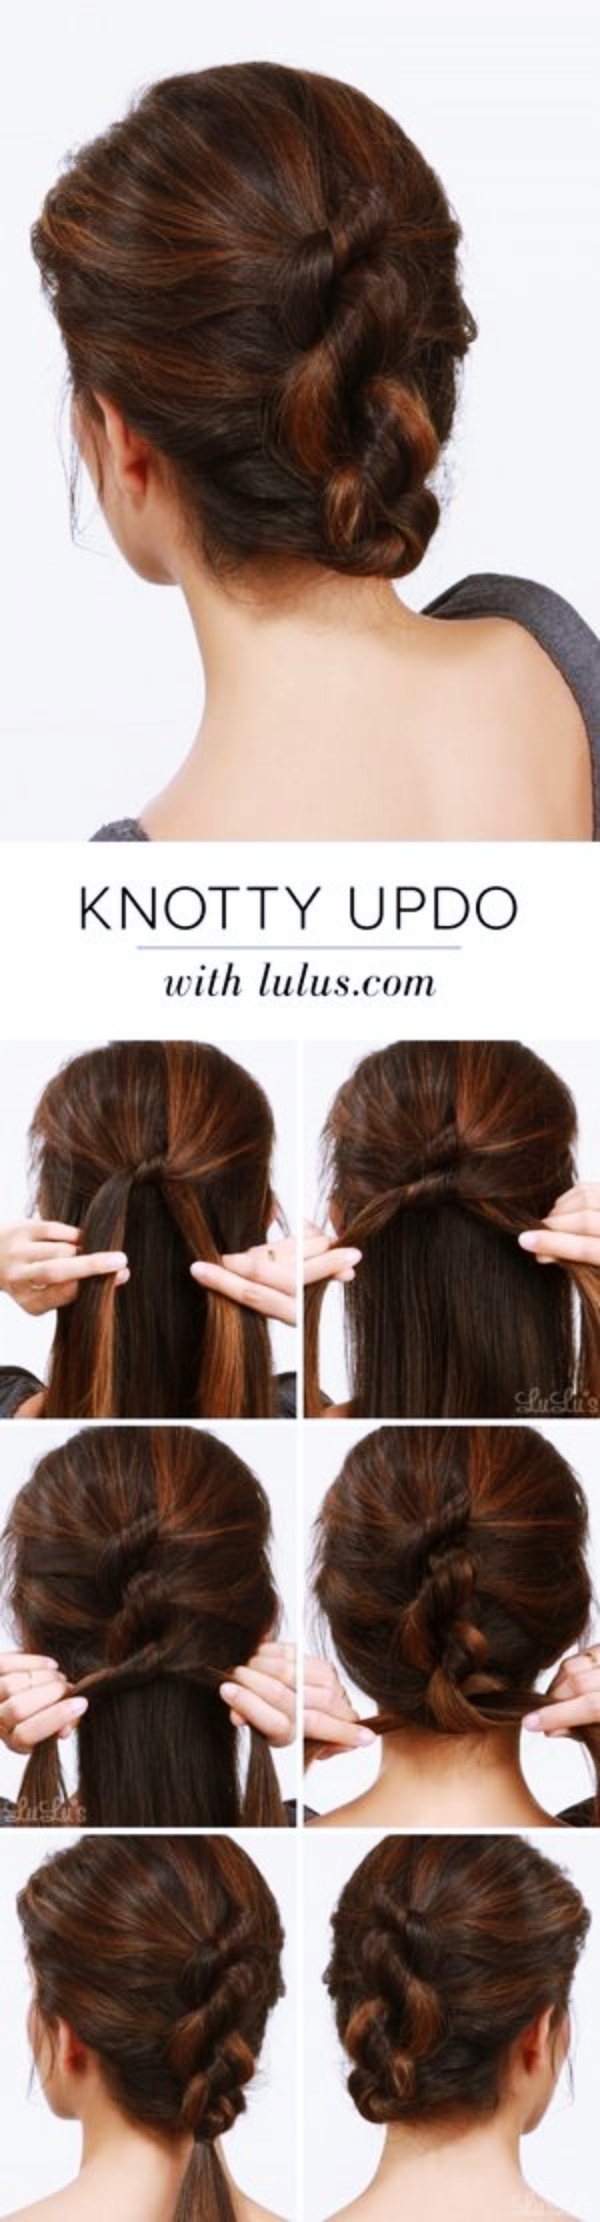 Self-Do-Hairstyles-For-Working-MOMs